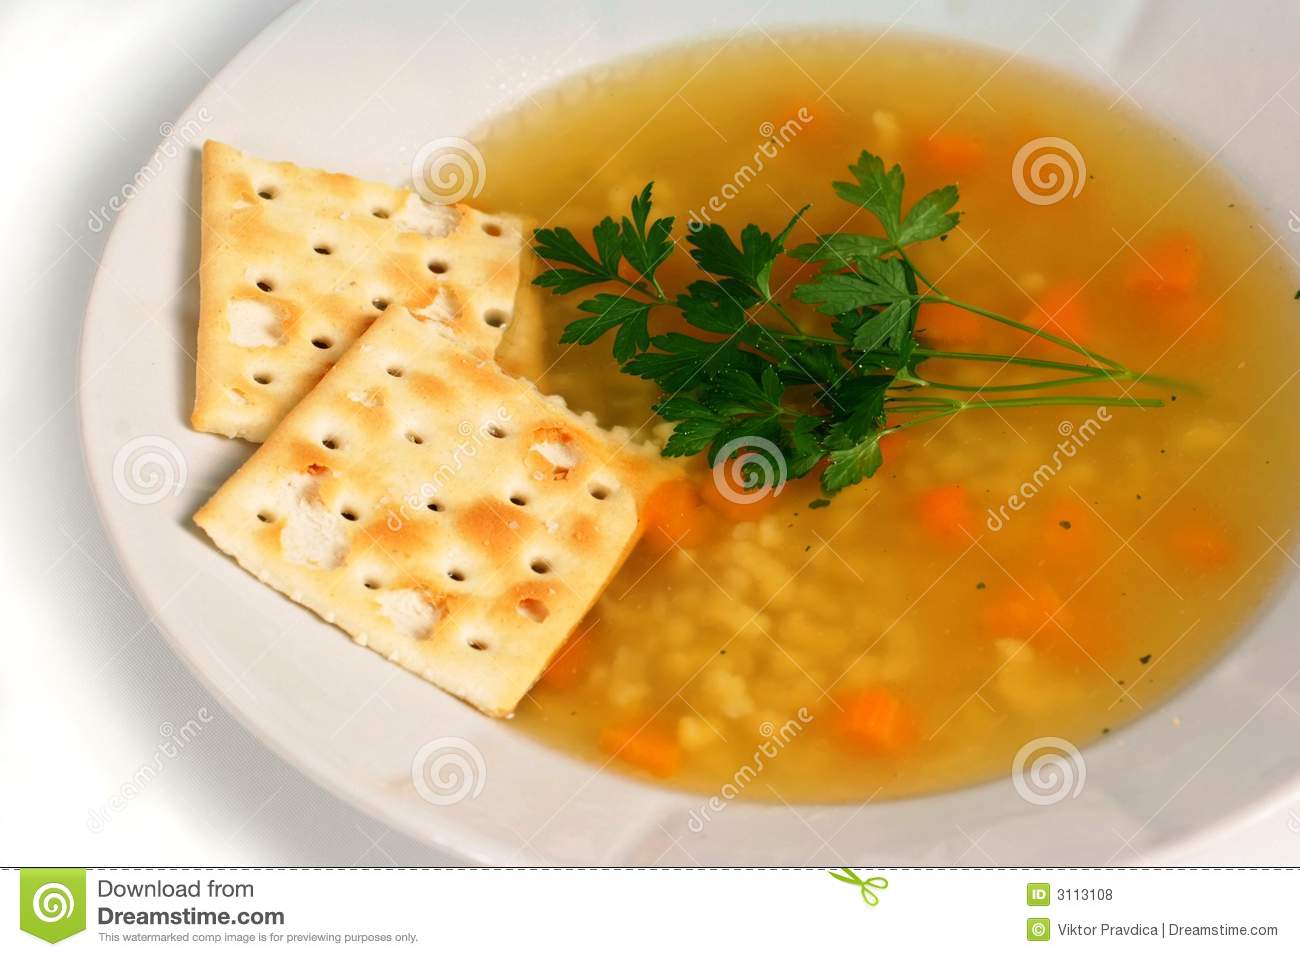 Chicken Soup With Crackers Royalty Free Stock Photos   Image  3113108